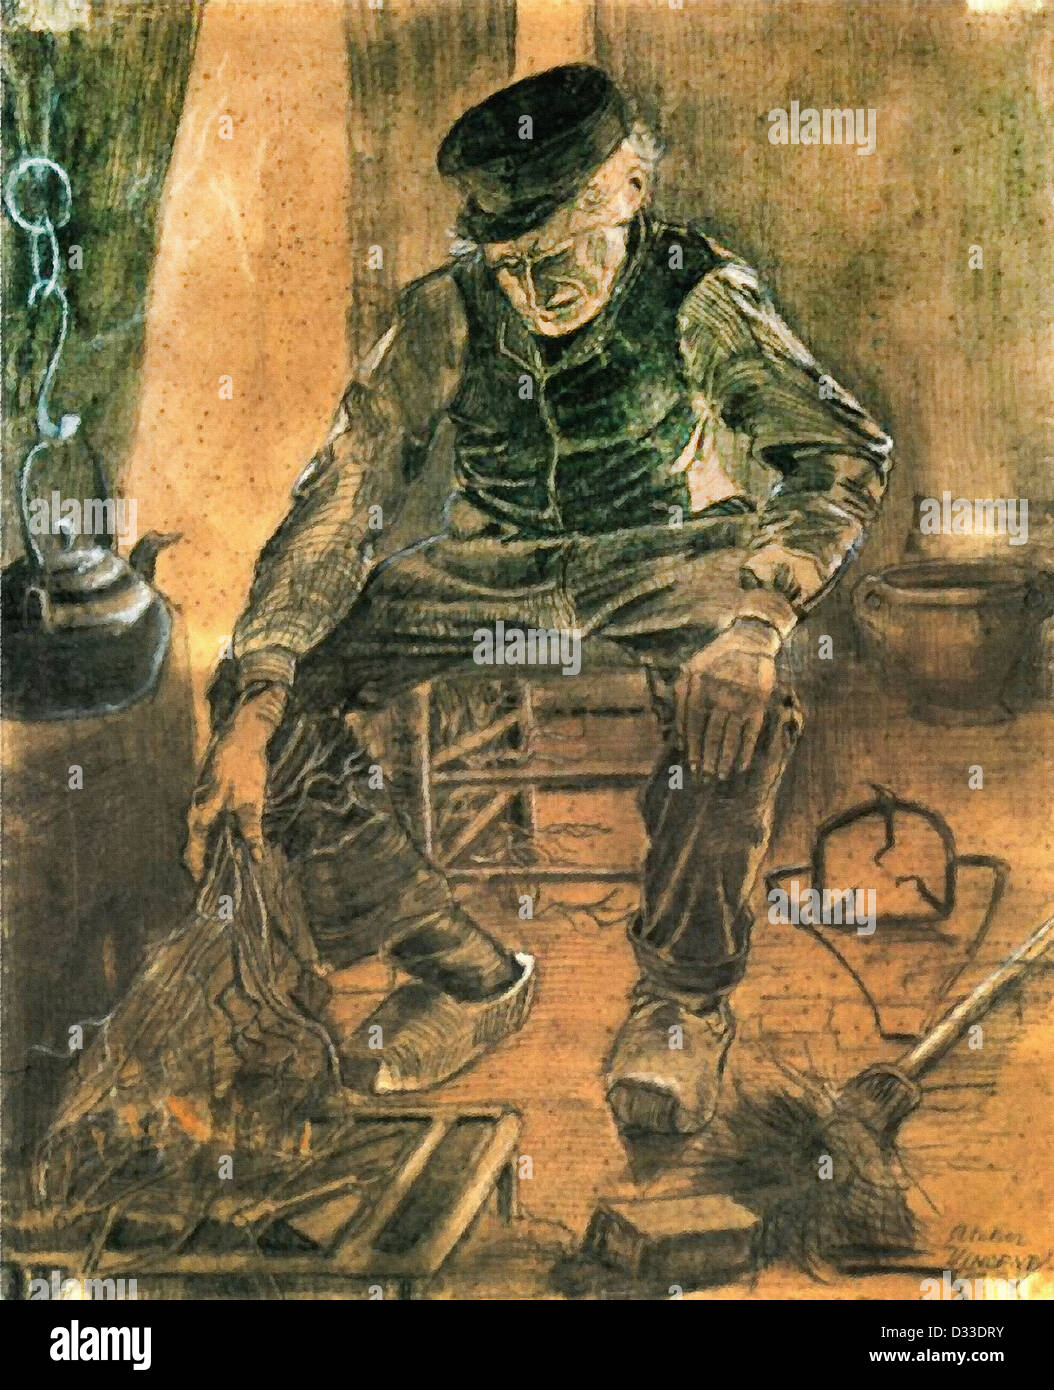 Vincent van Gogh: An Old Man Putting Dry Rice on the Hearth. 1881. Rijksmuseum Kröller-Müller, Otterlo, Netherlands. Realism. Stock Photo